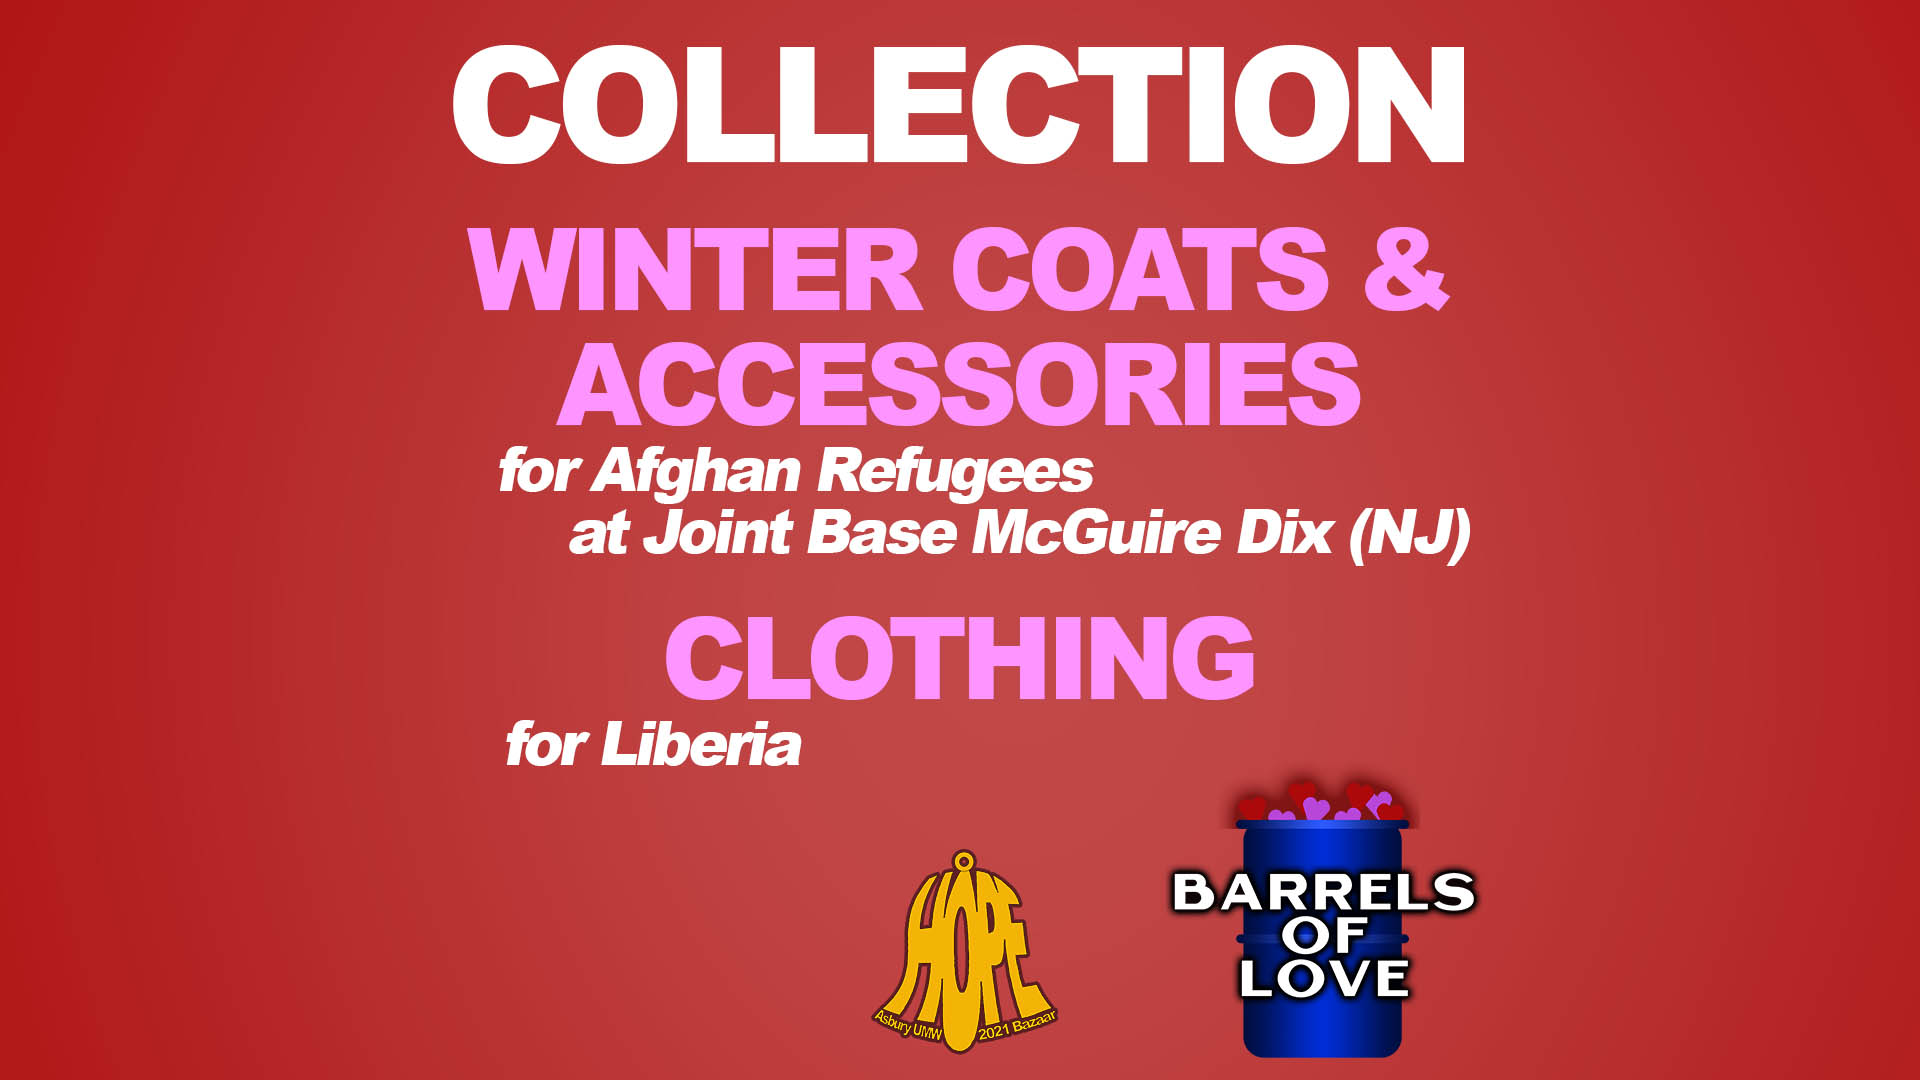 Clothing and Winter Coats & Accessories Collection